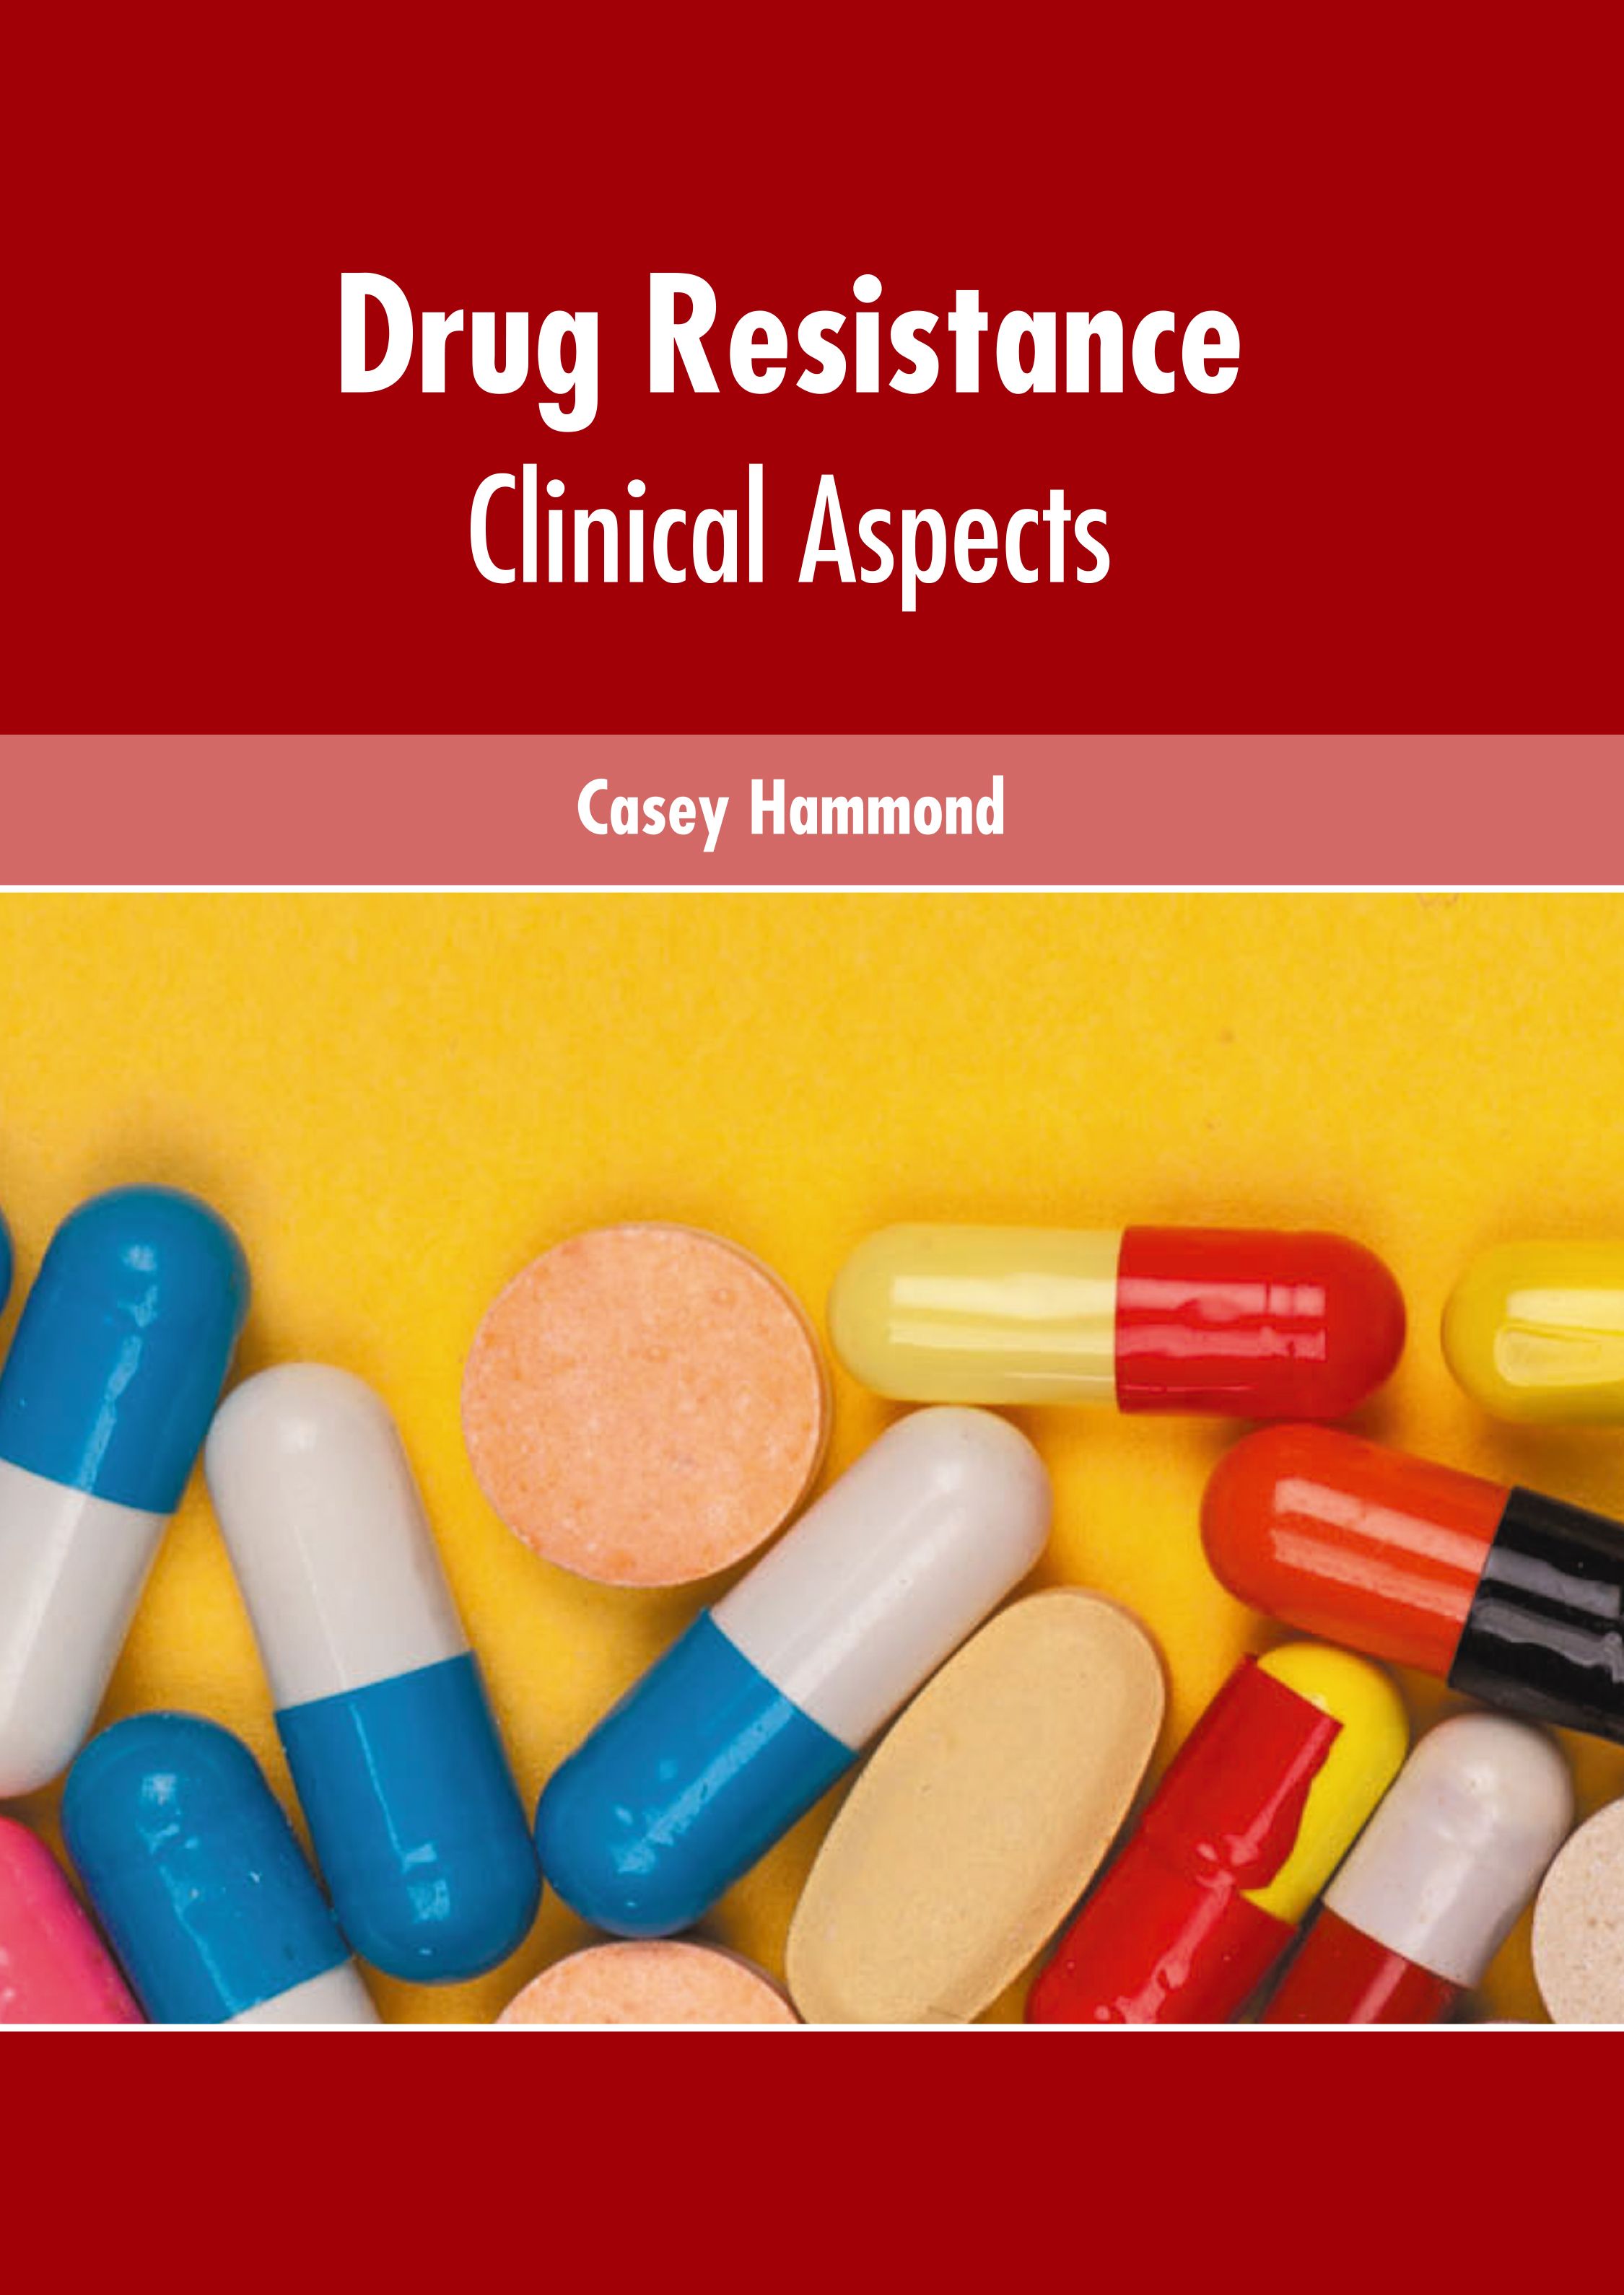 DRUG RESISTANCE: CLINICAL ASPECTS | ISBN: 9781639272105